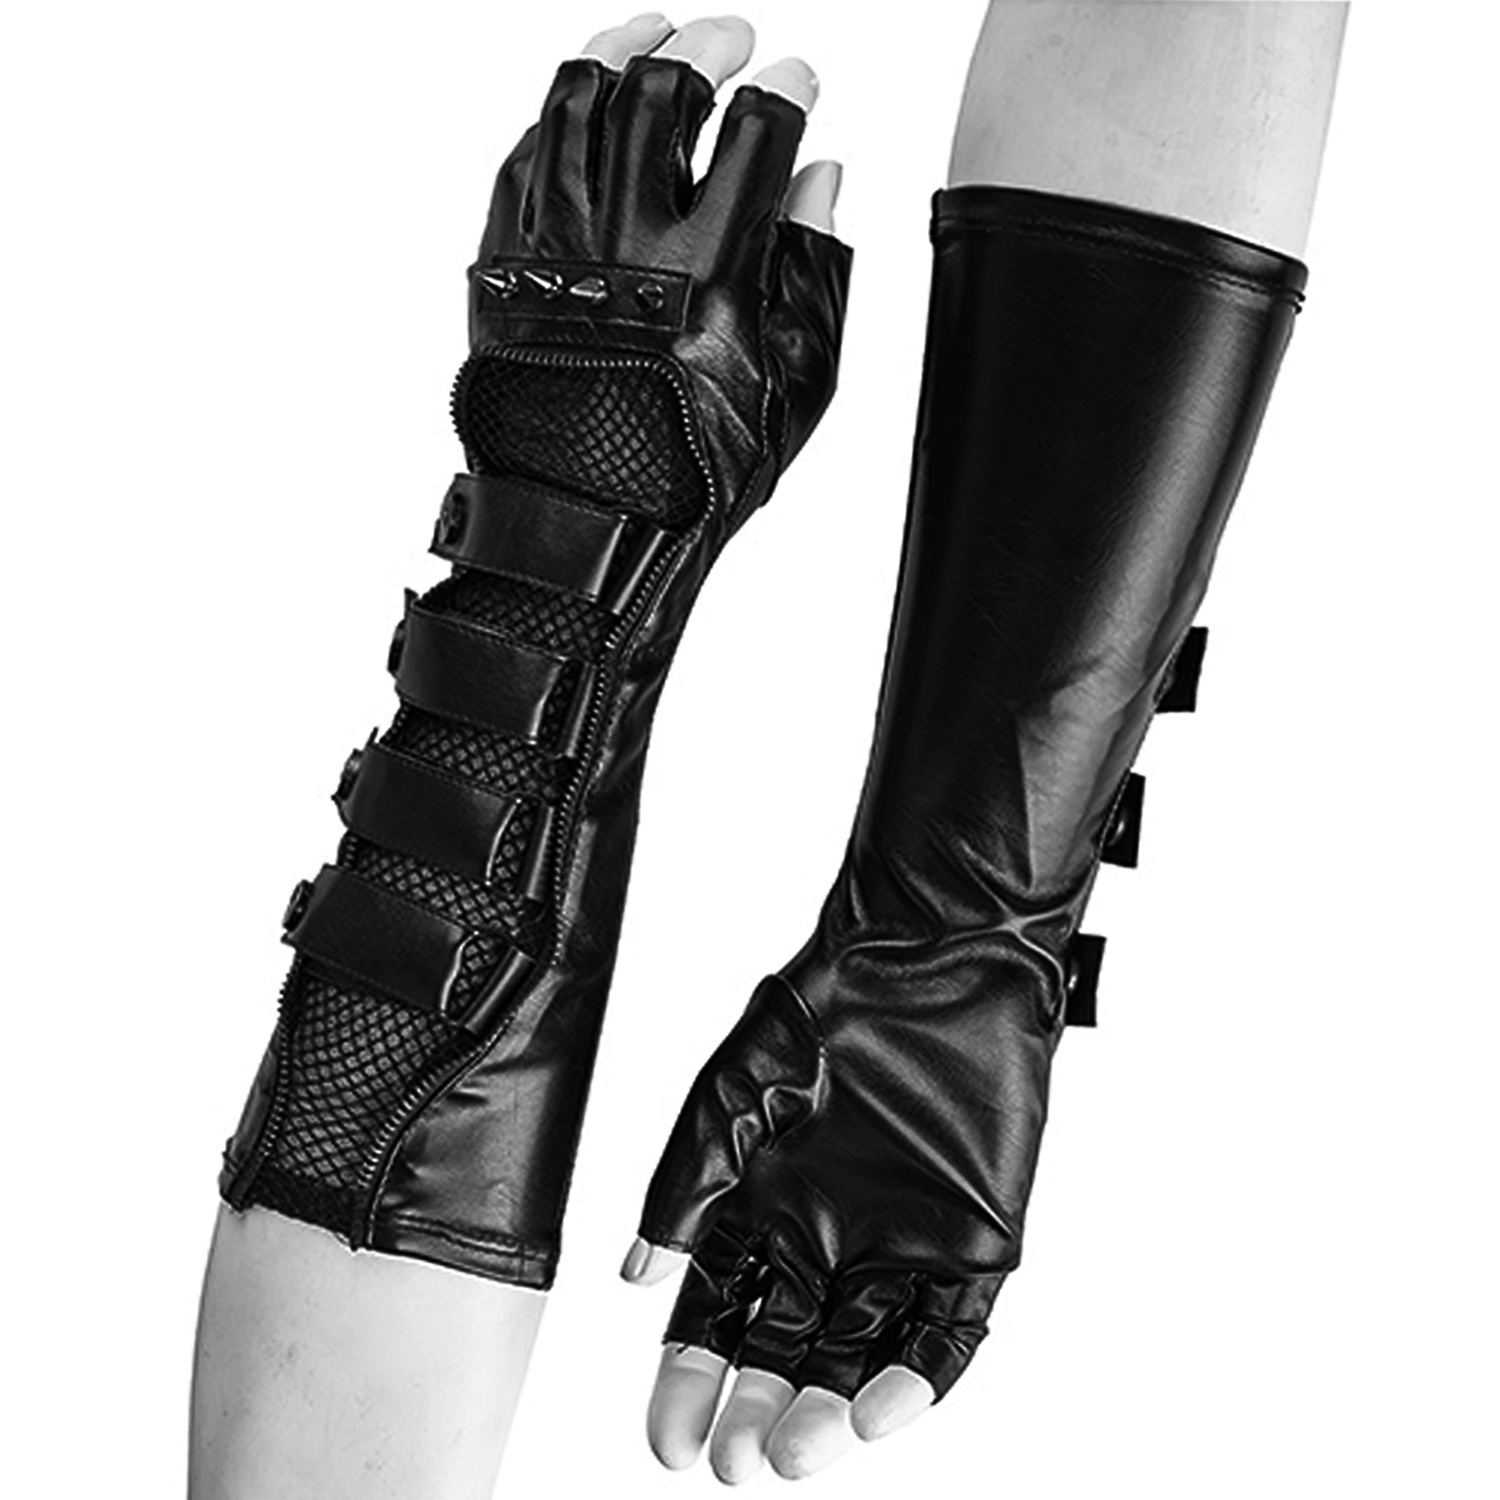 Punk Rave Mens Gothic Fingerless Archery Gloves Black Faux Leather Apocalyptic